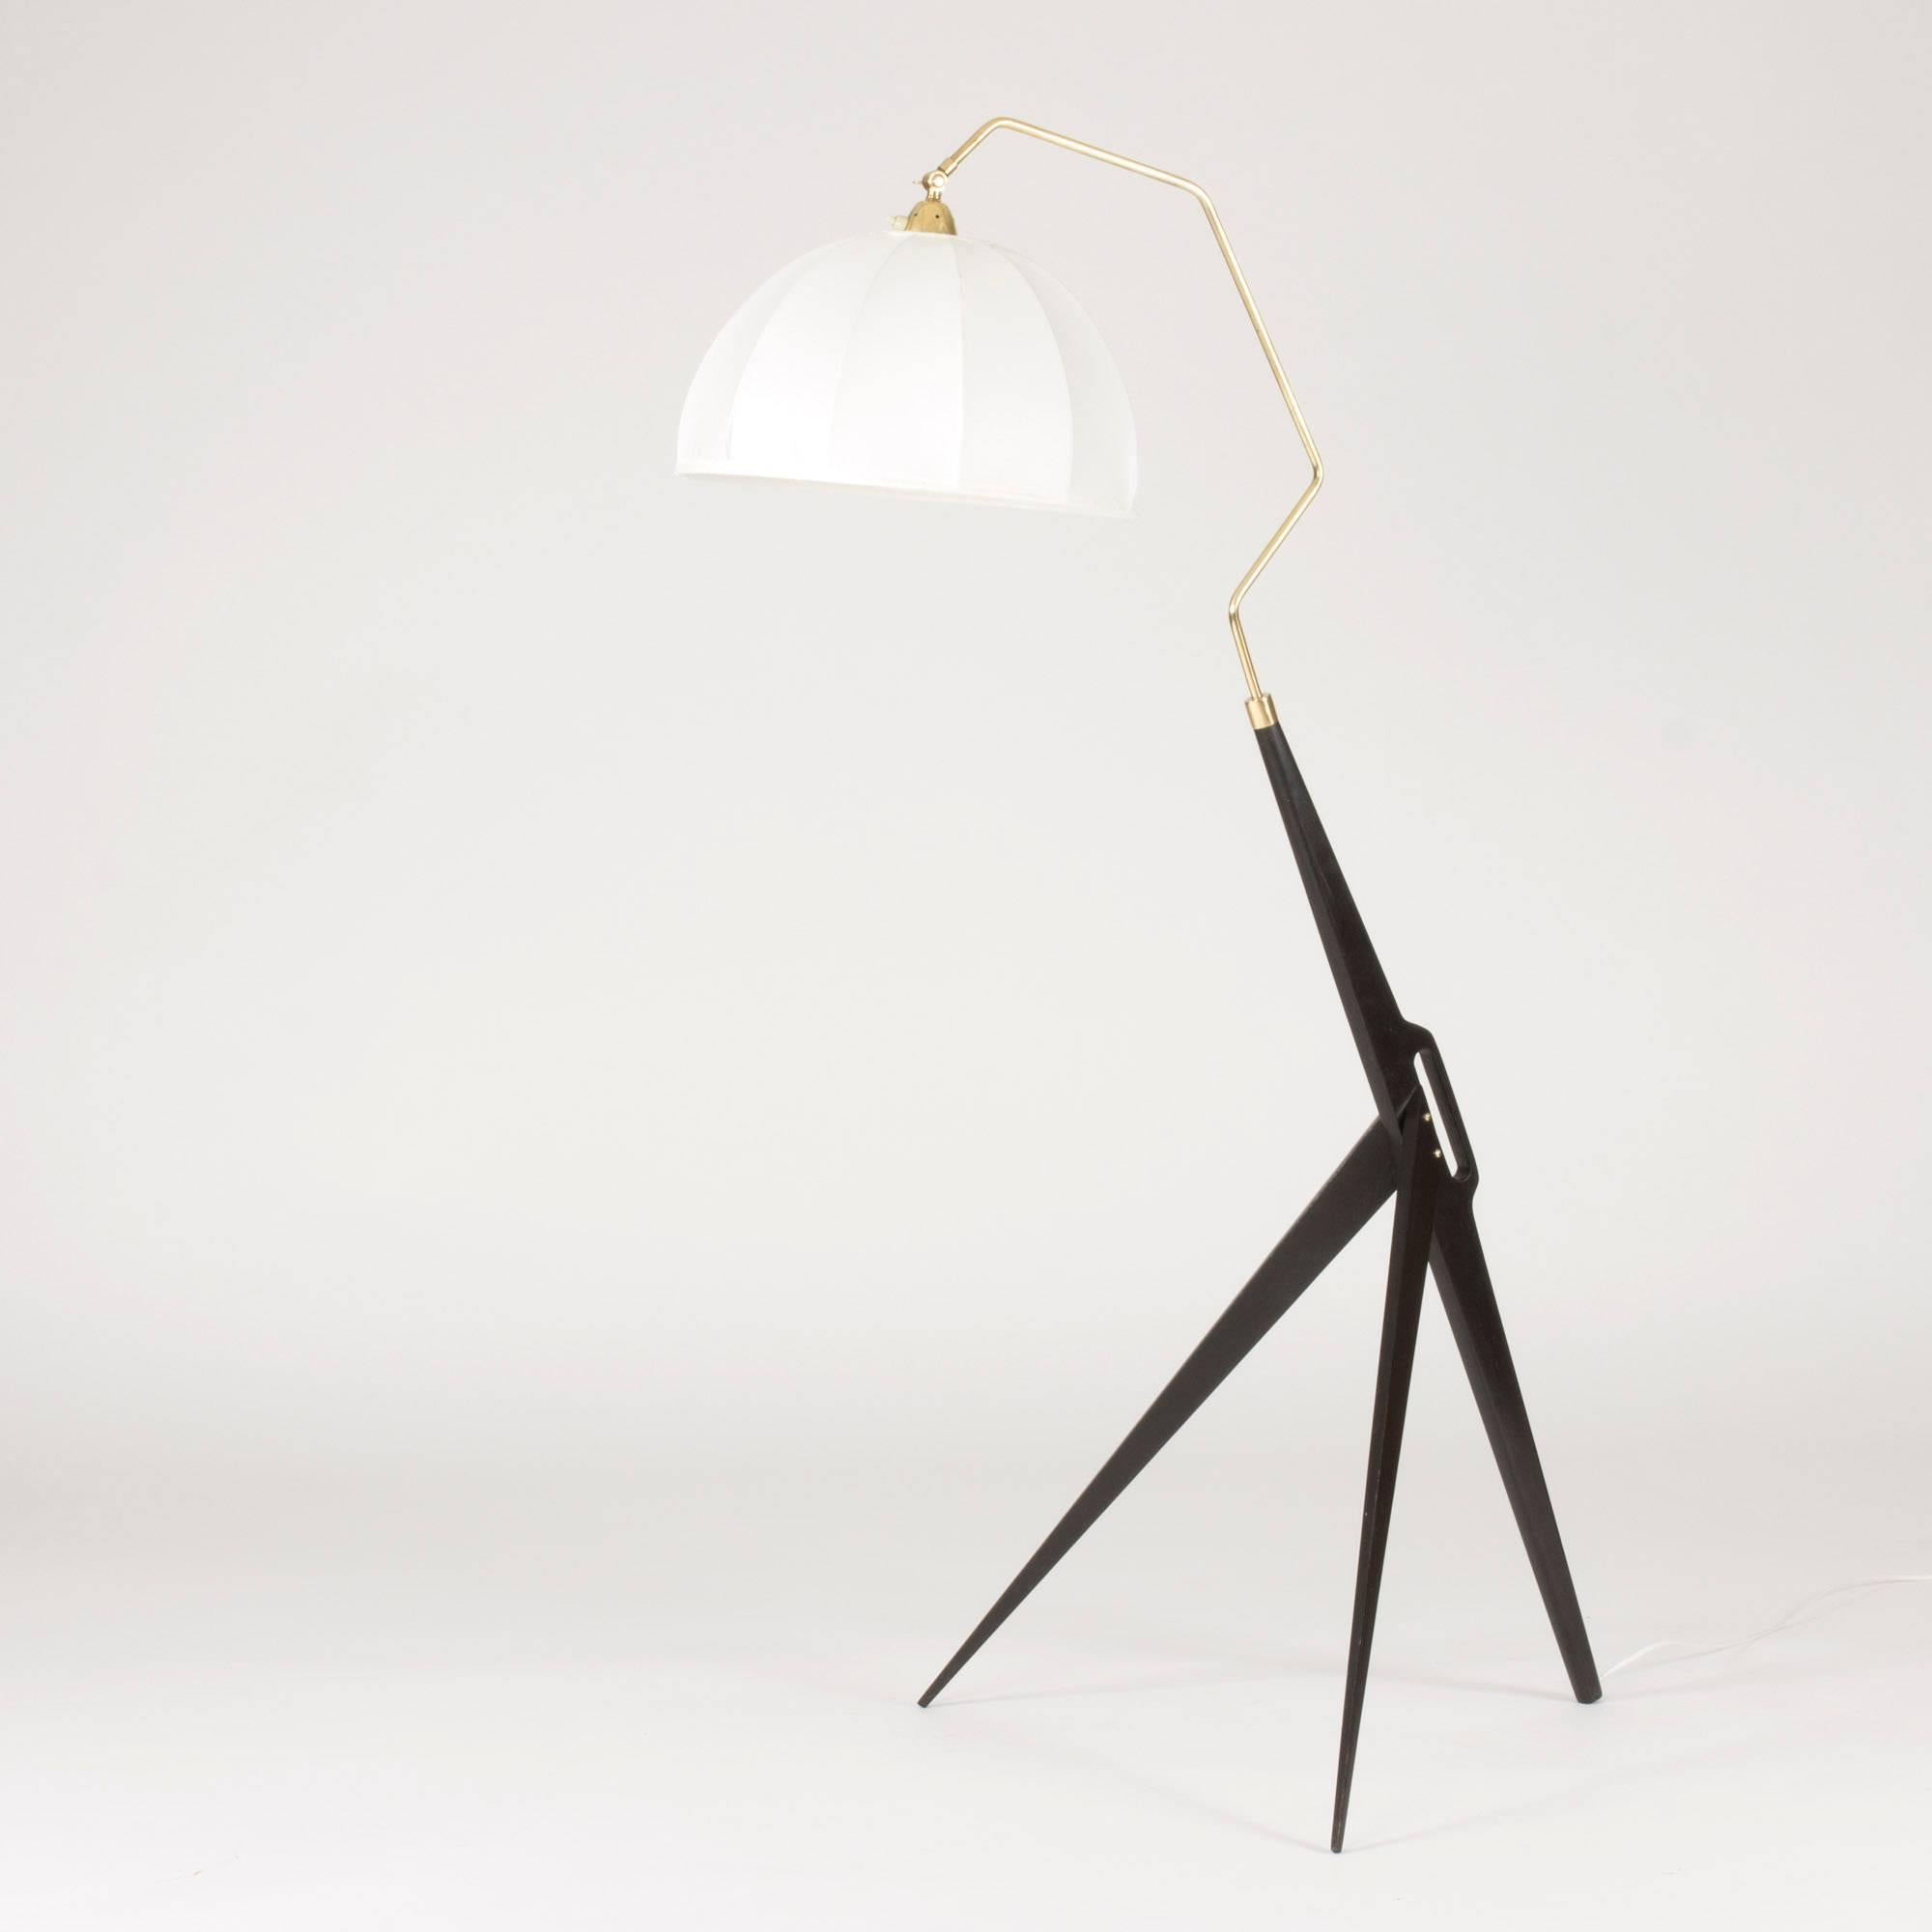 Voluminous prototype floor lamp attributed to Hans Bergström. Wide, wooden, three-legged base with a handle in a style typical of Bergström. A brass pole extends from the base and has been shaped to fit the large shade. Extremely rare and a real